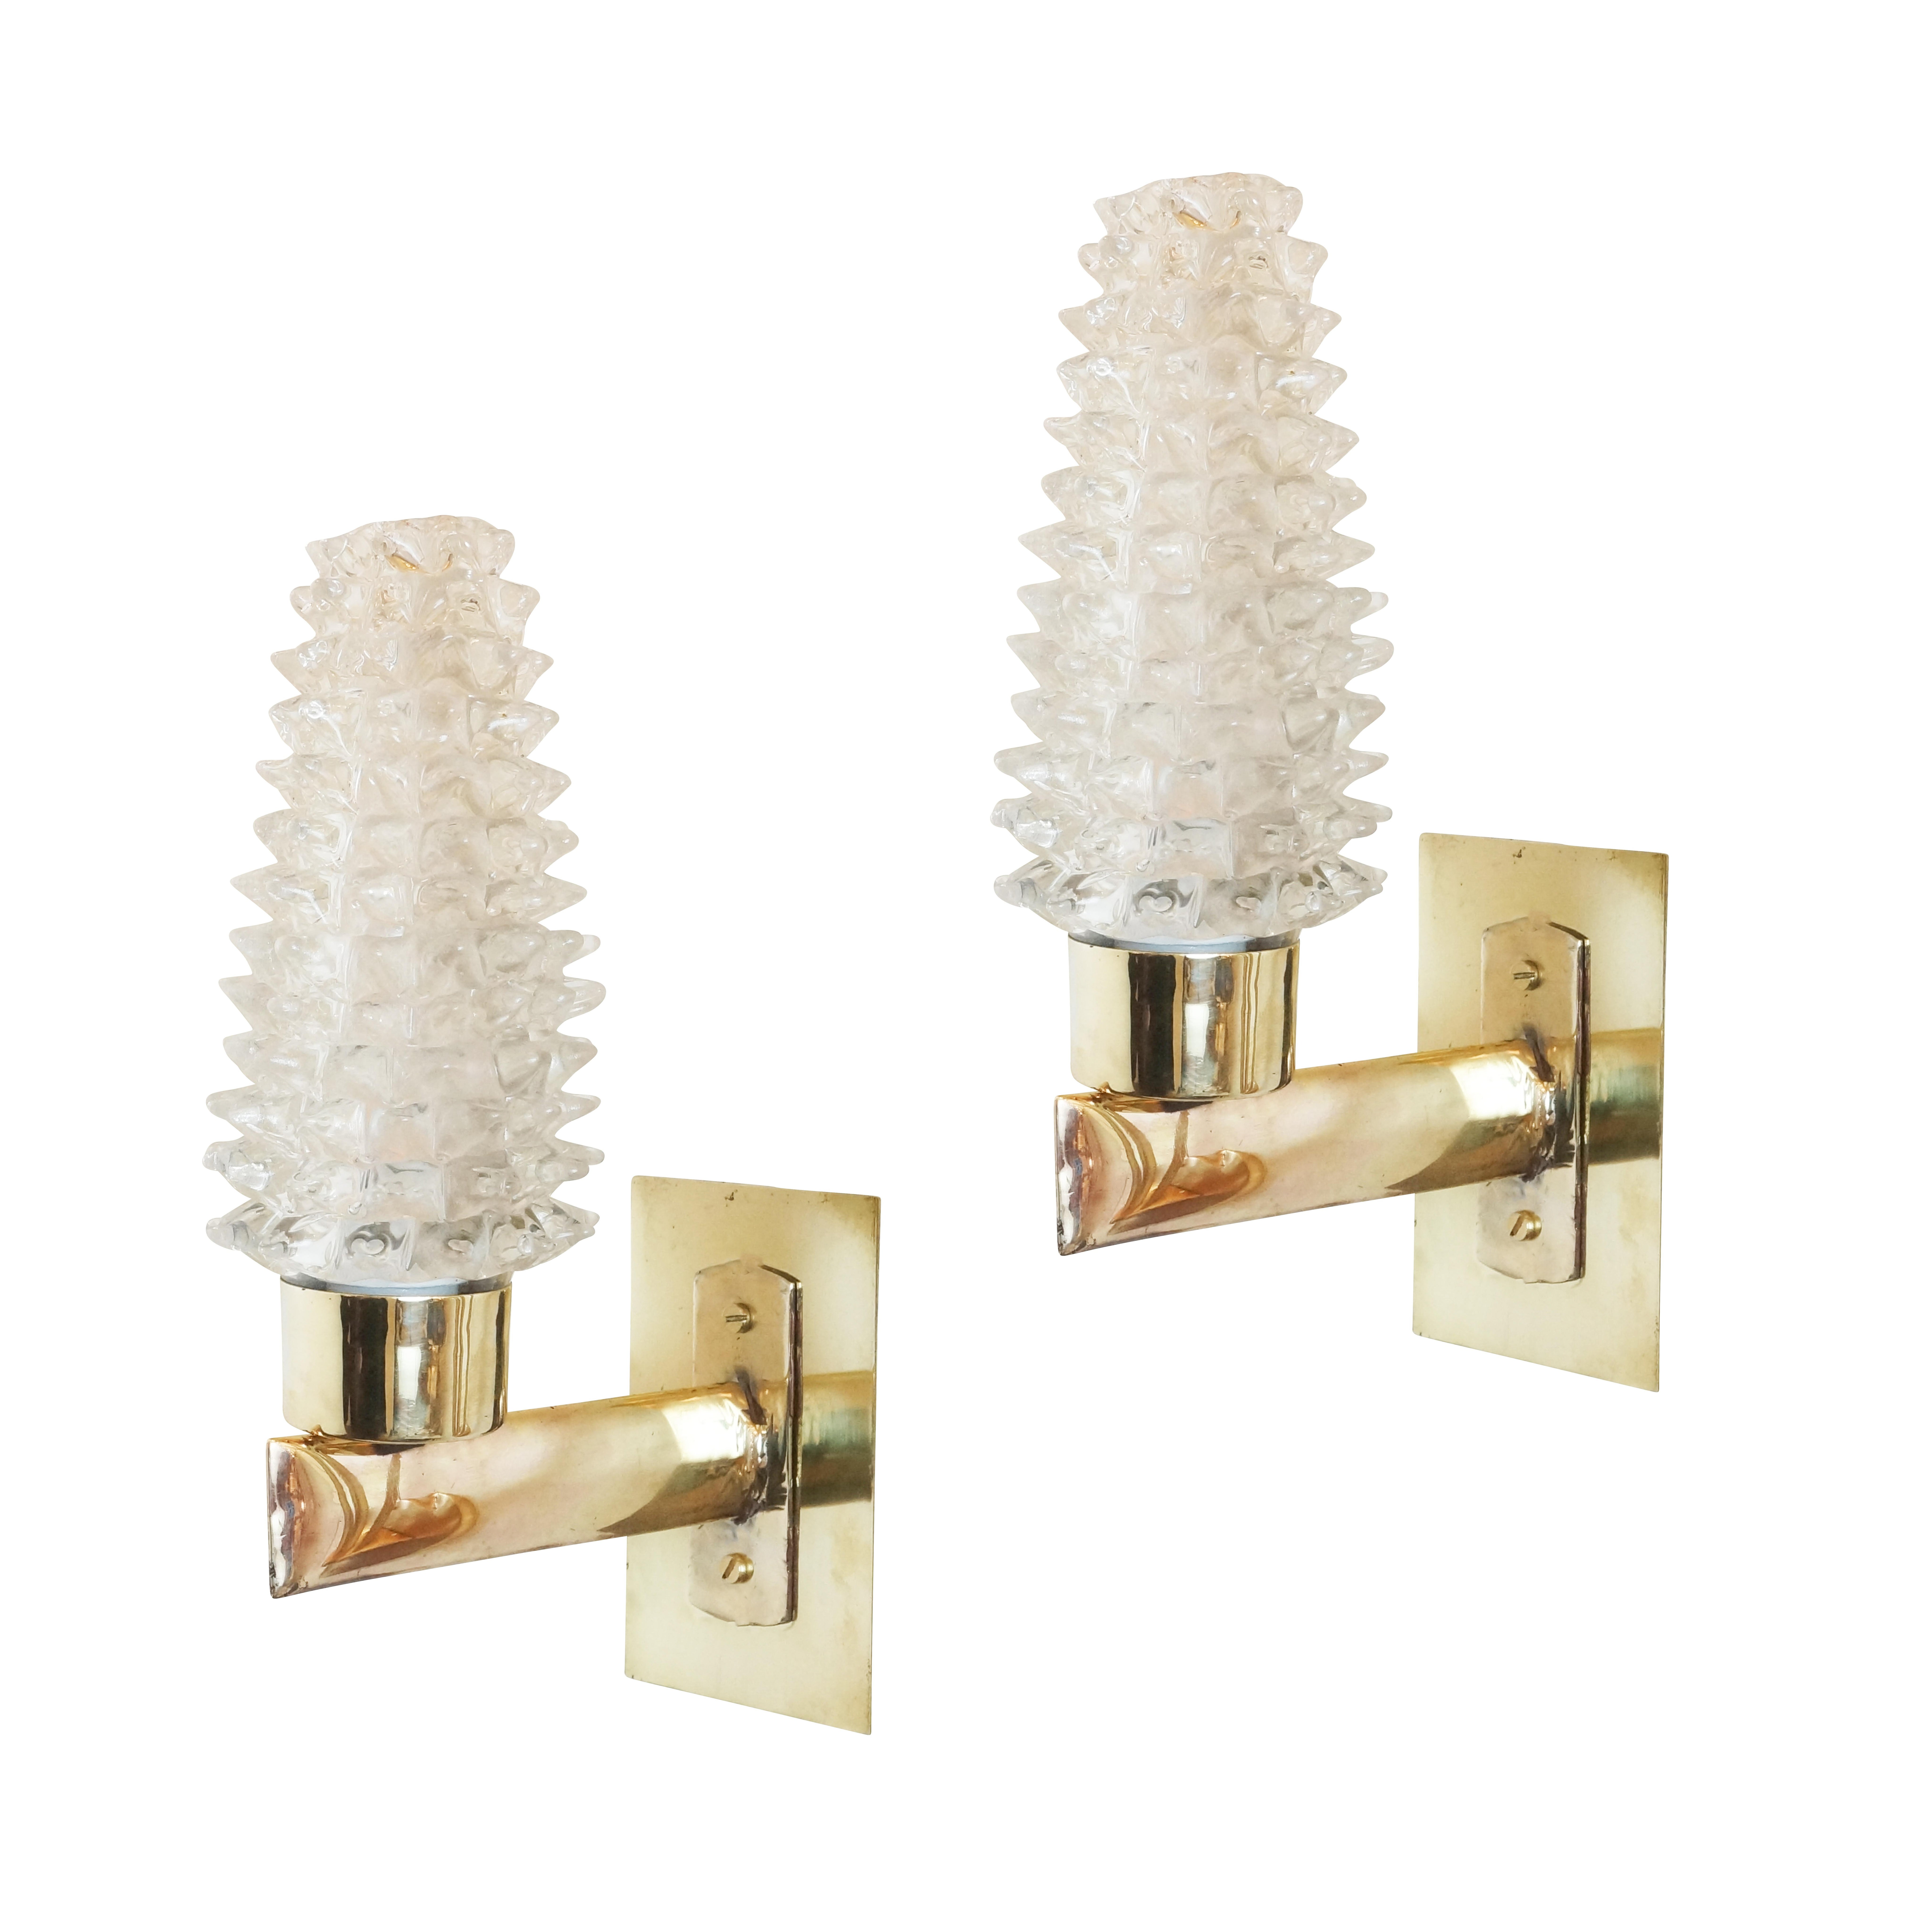 Murano Glass "Rostrato" Sconces by Barovier, Italy, 1960s